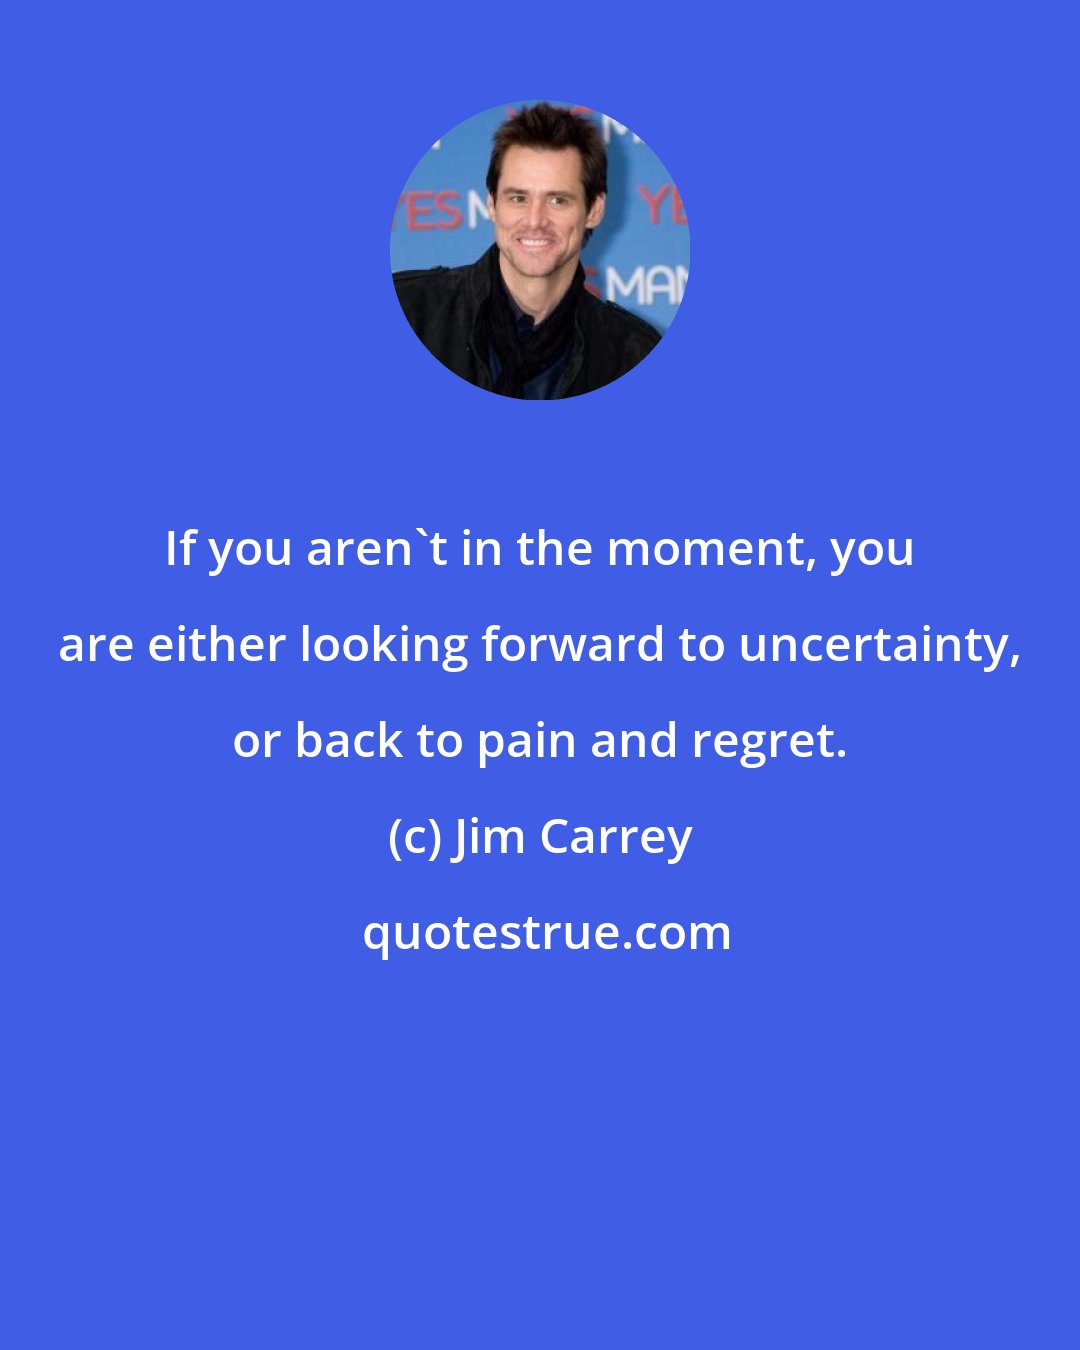 Jim Carrey: If you aren't in the moment, you are either looking forward to uncertainty, or back to pain and regret.